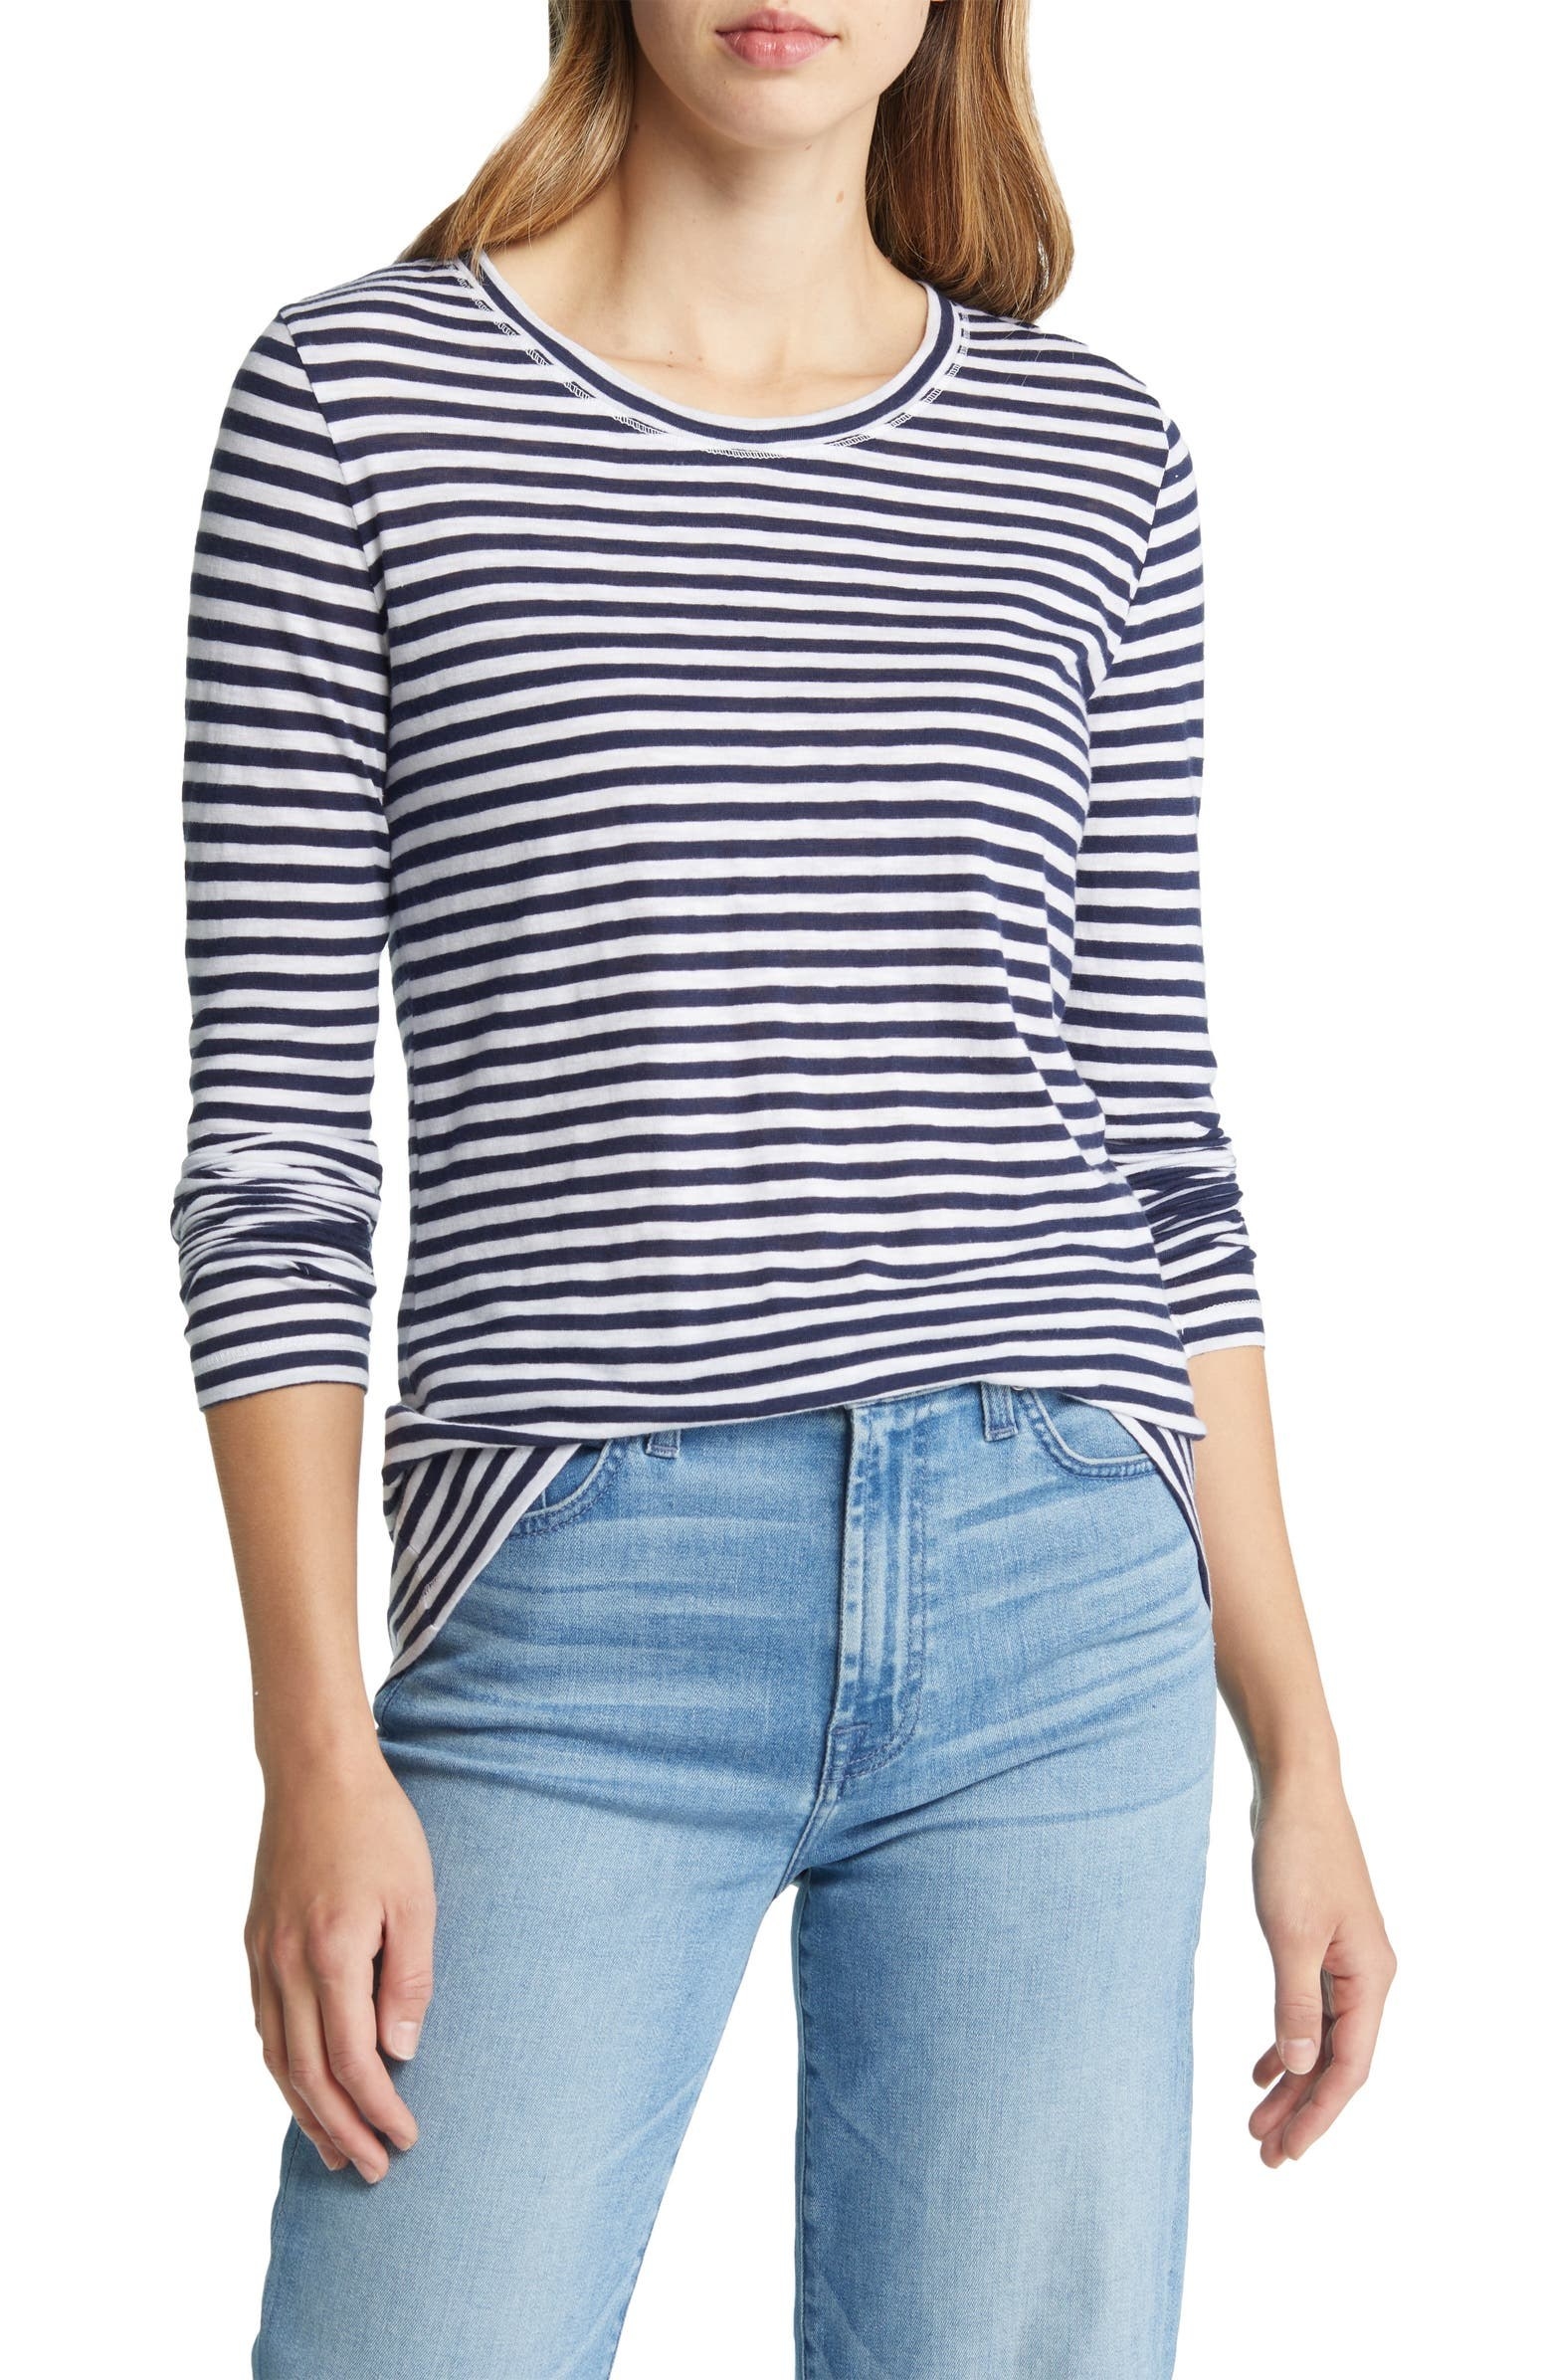 Modeling wearing blue and white stripped shirt with the front tucked in to jeans